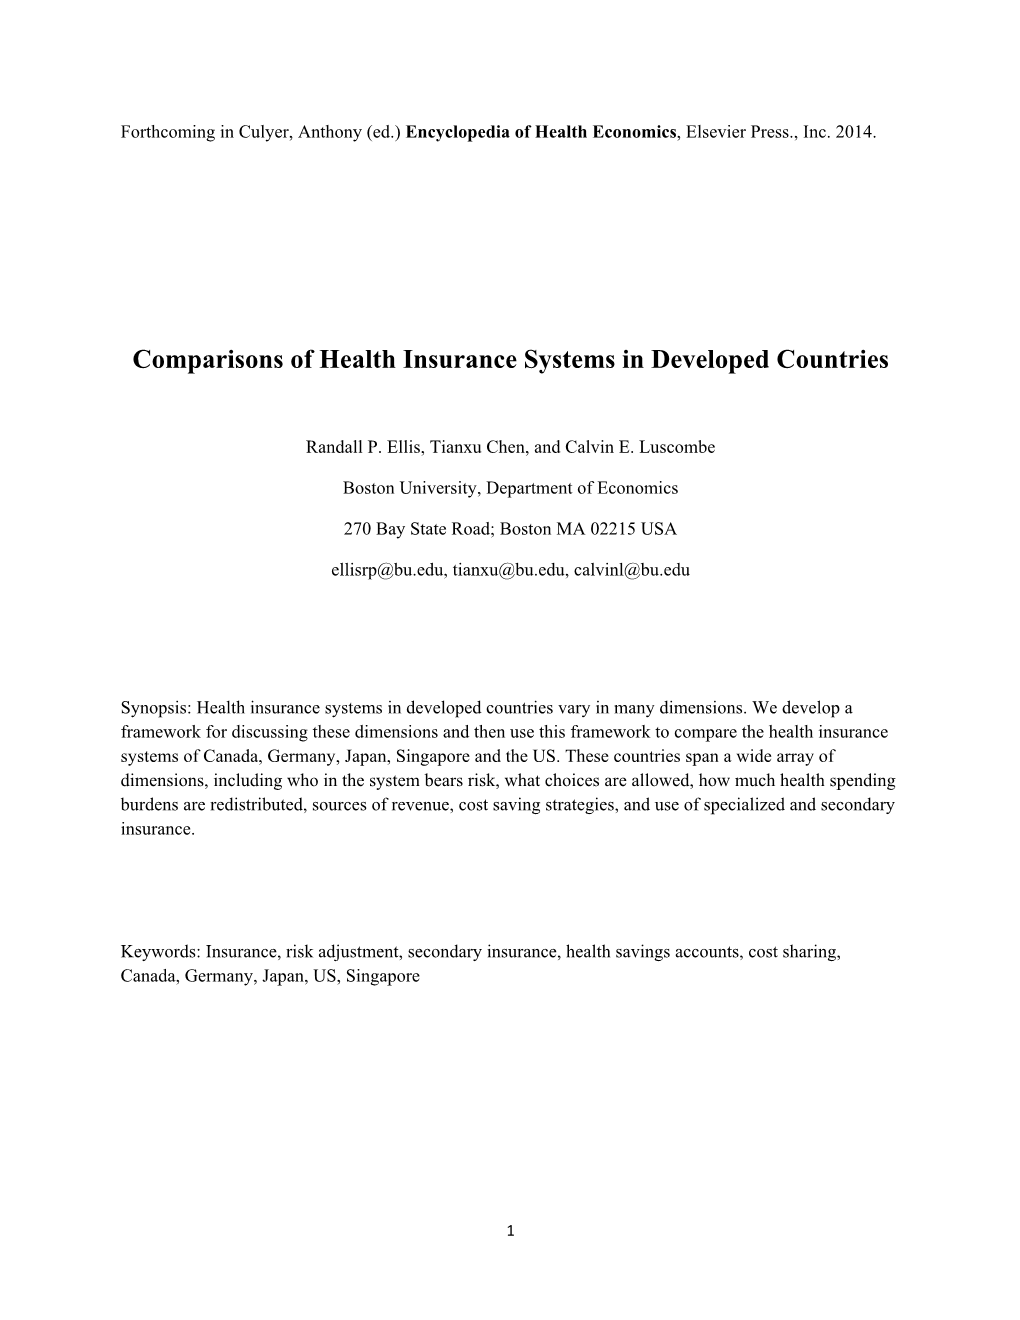 Comparisons of Health Insurance Systems in Developed Countries